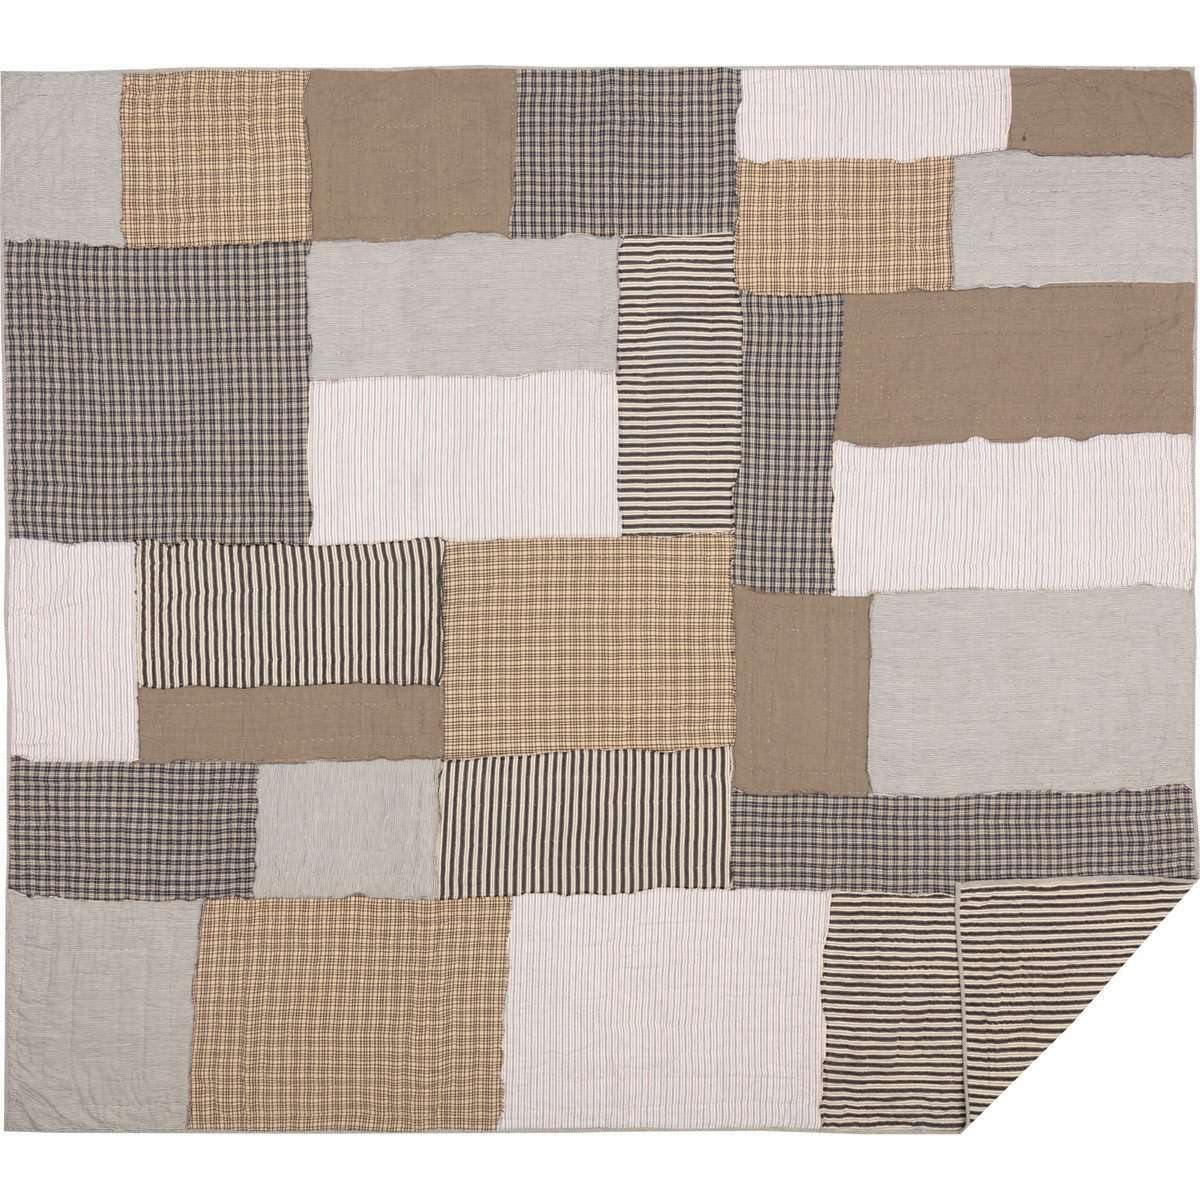 Ashmont King Quilt 110Wx97L VHC Brands full